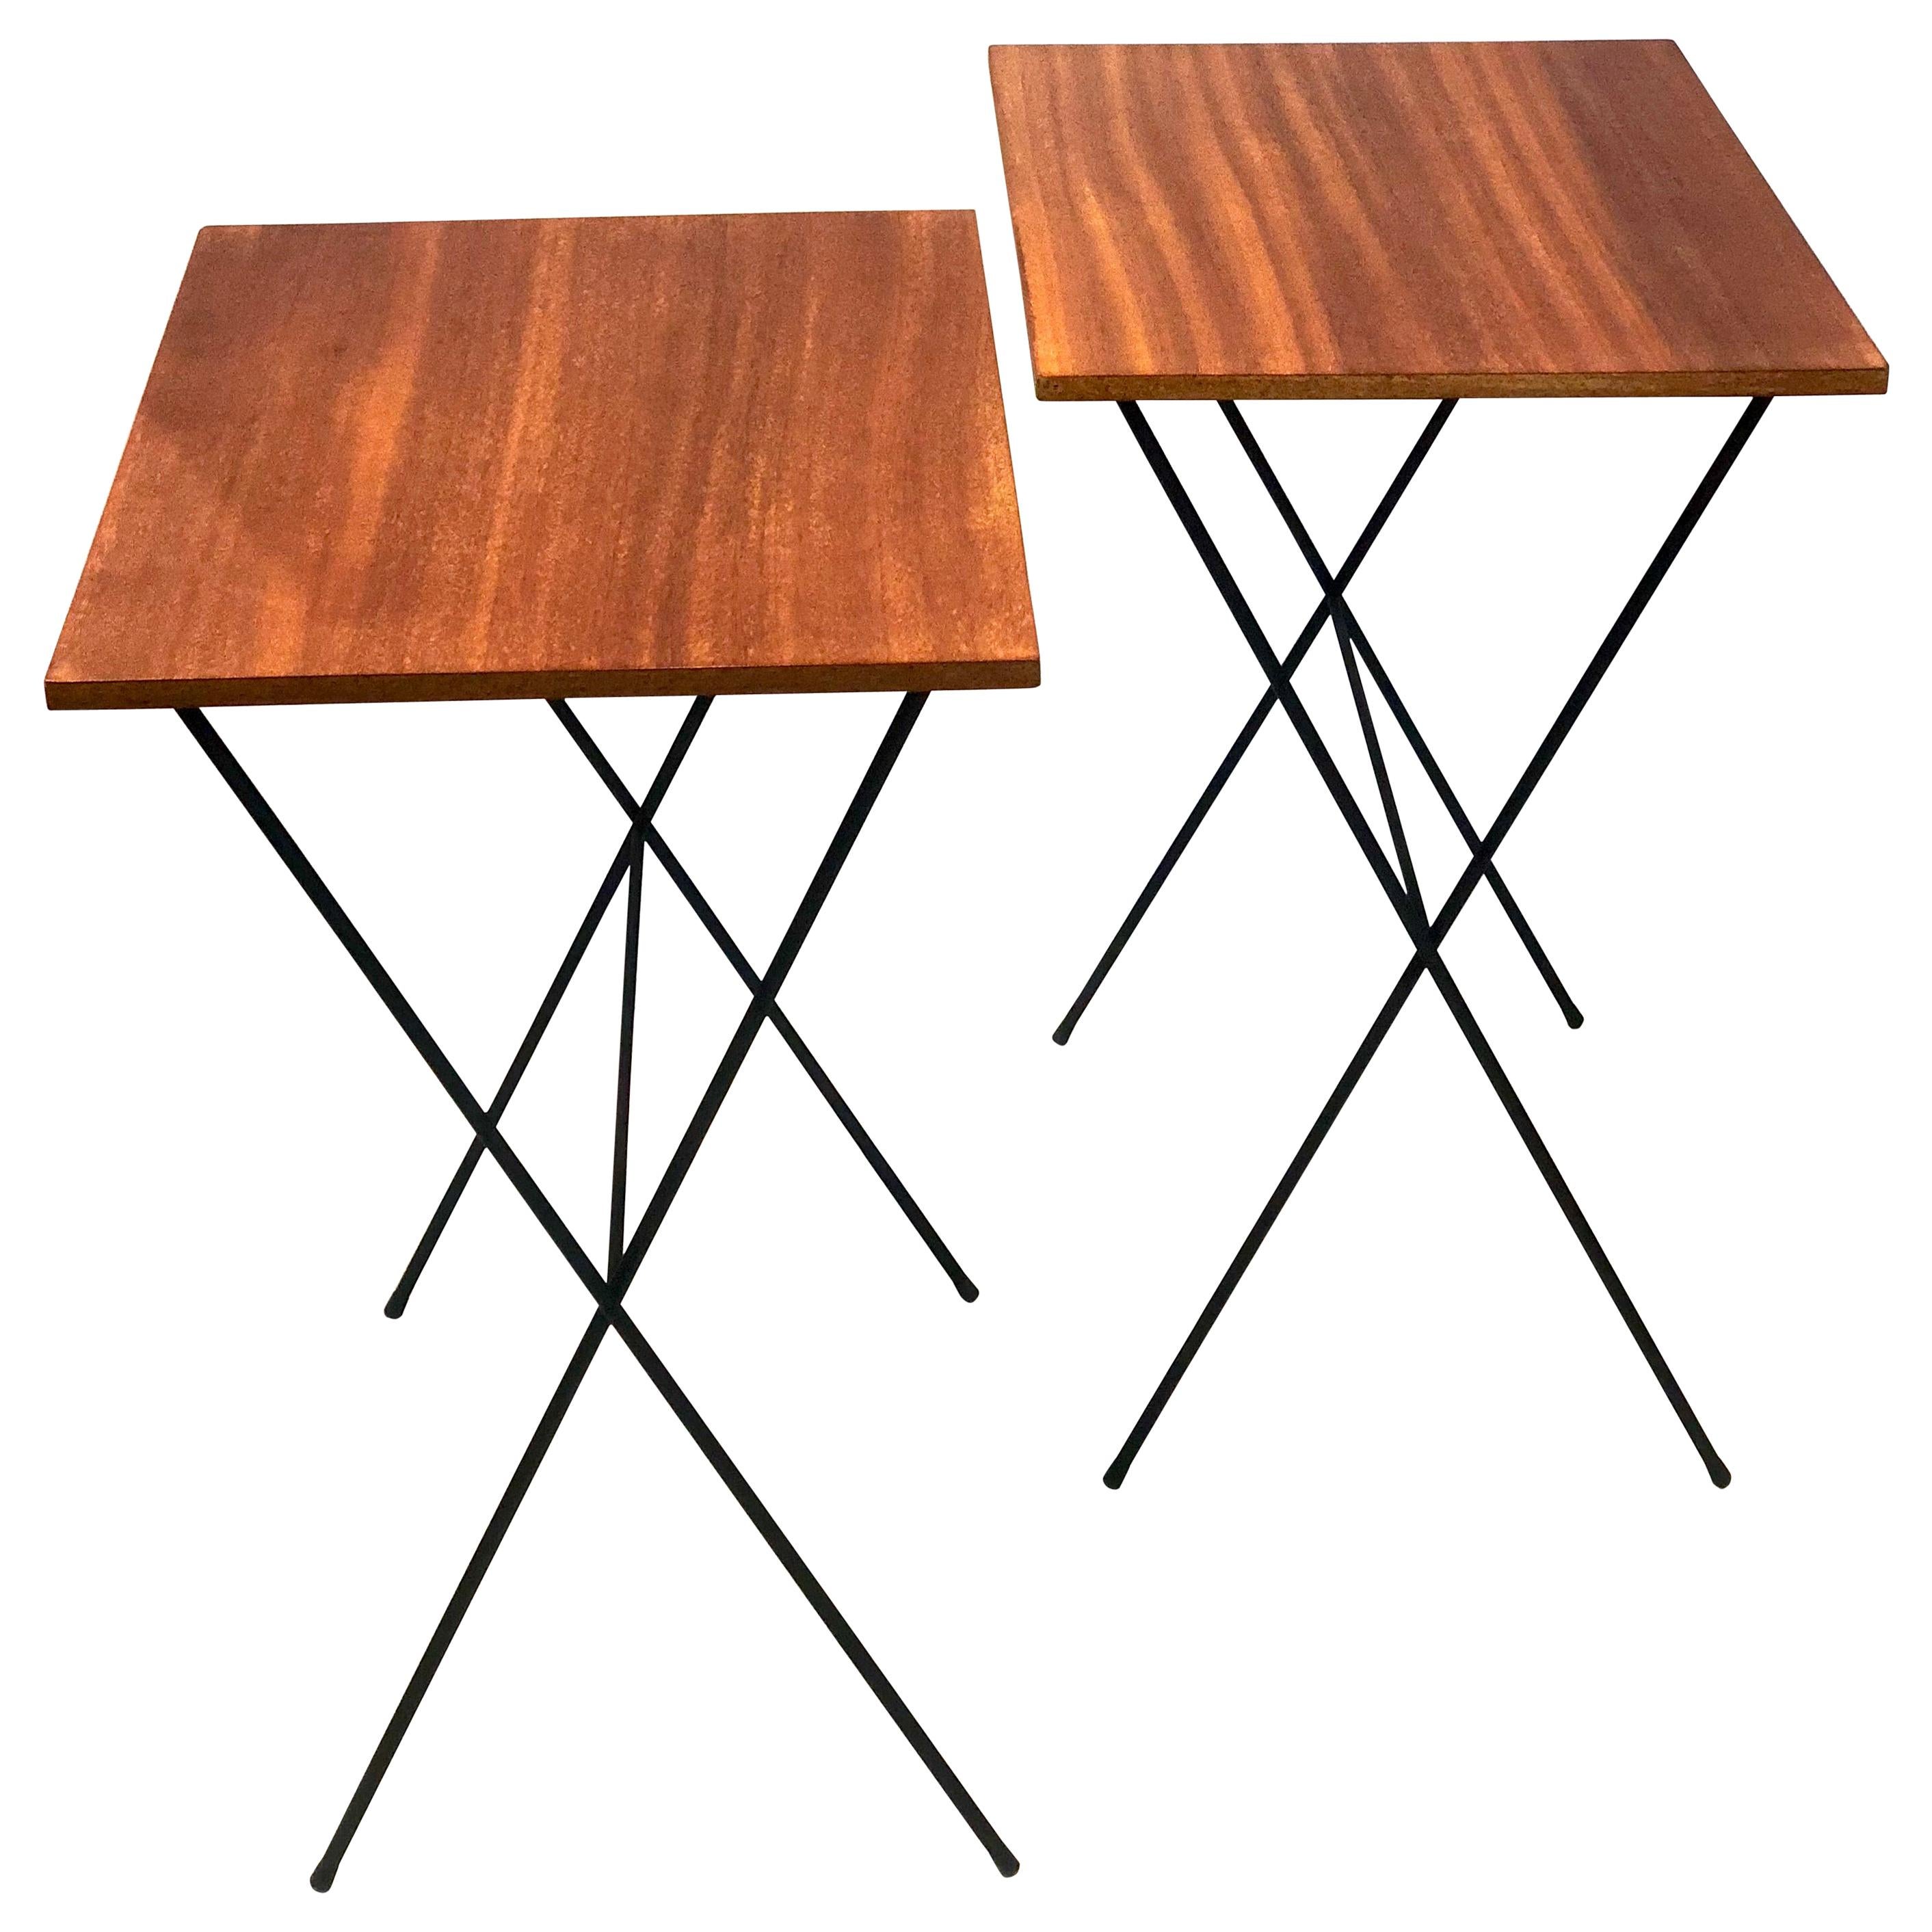 Pair of Atomic Age Mid-Century Modern Petite Folding TV Tray Tables at  1stDibs | mid century modern tv trays, mid century tv trays, mid century  modern tray table